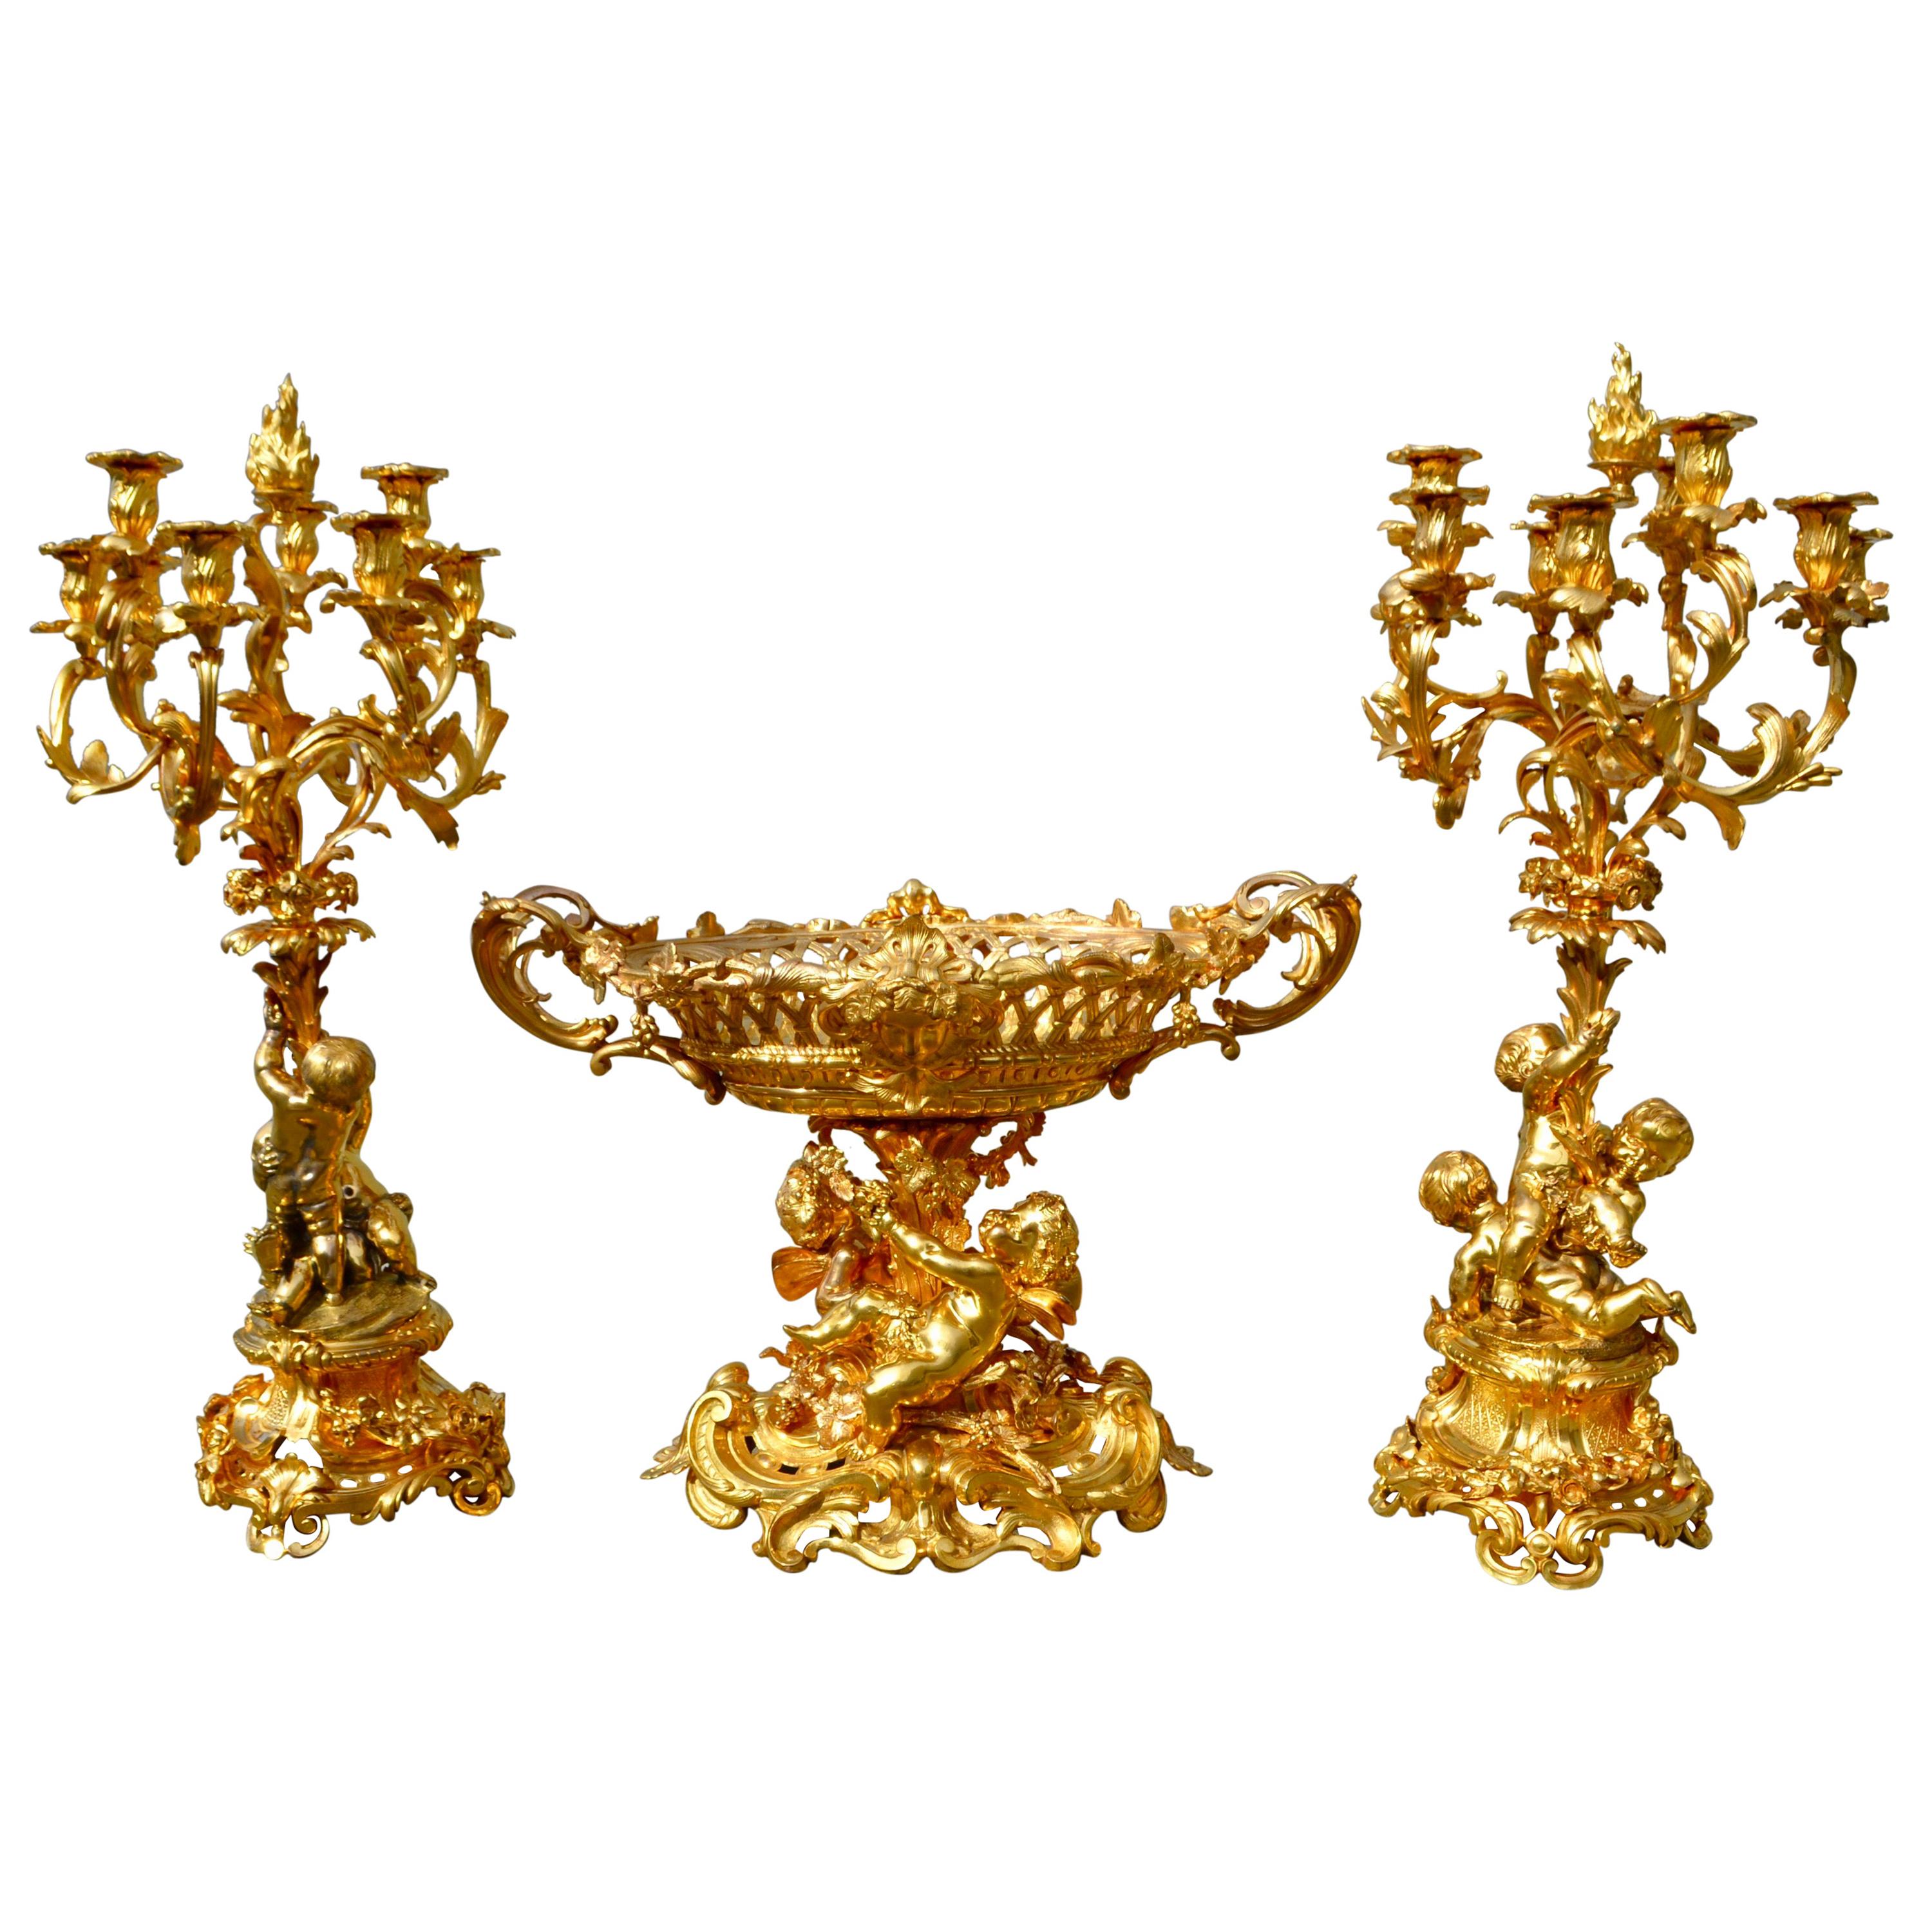 Napoleon III Period Gild Bronze Table Centre and Matching Candelabra